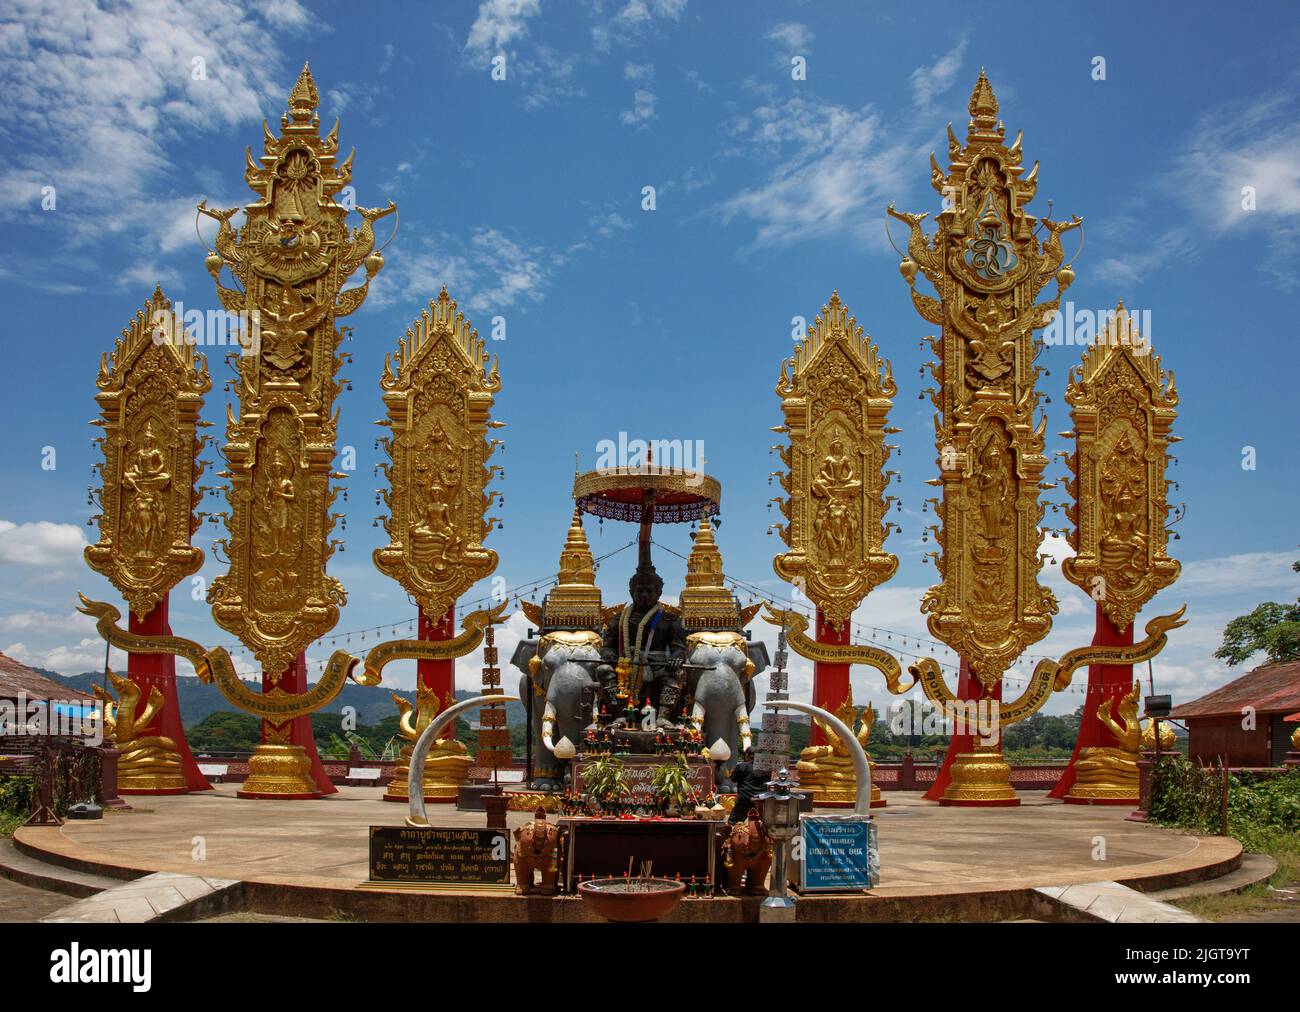 A Buddhist shrine at the GOLDEN TRIANGLE is where Thailand, Burma and Laos meet at the confluence of the Mekong and Ruak rivers - CHIANG   SAEN, THAIL Stock Photo